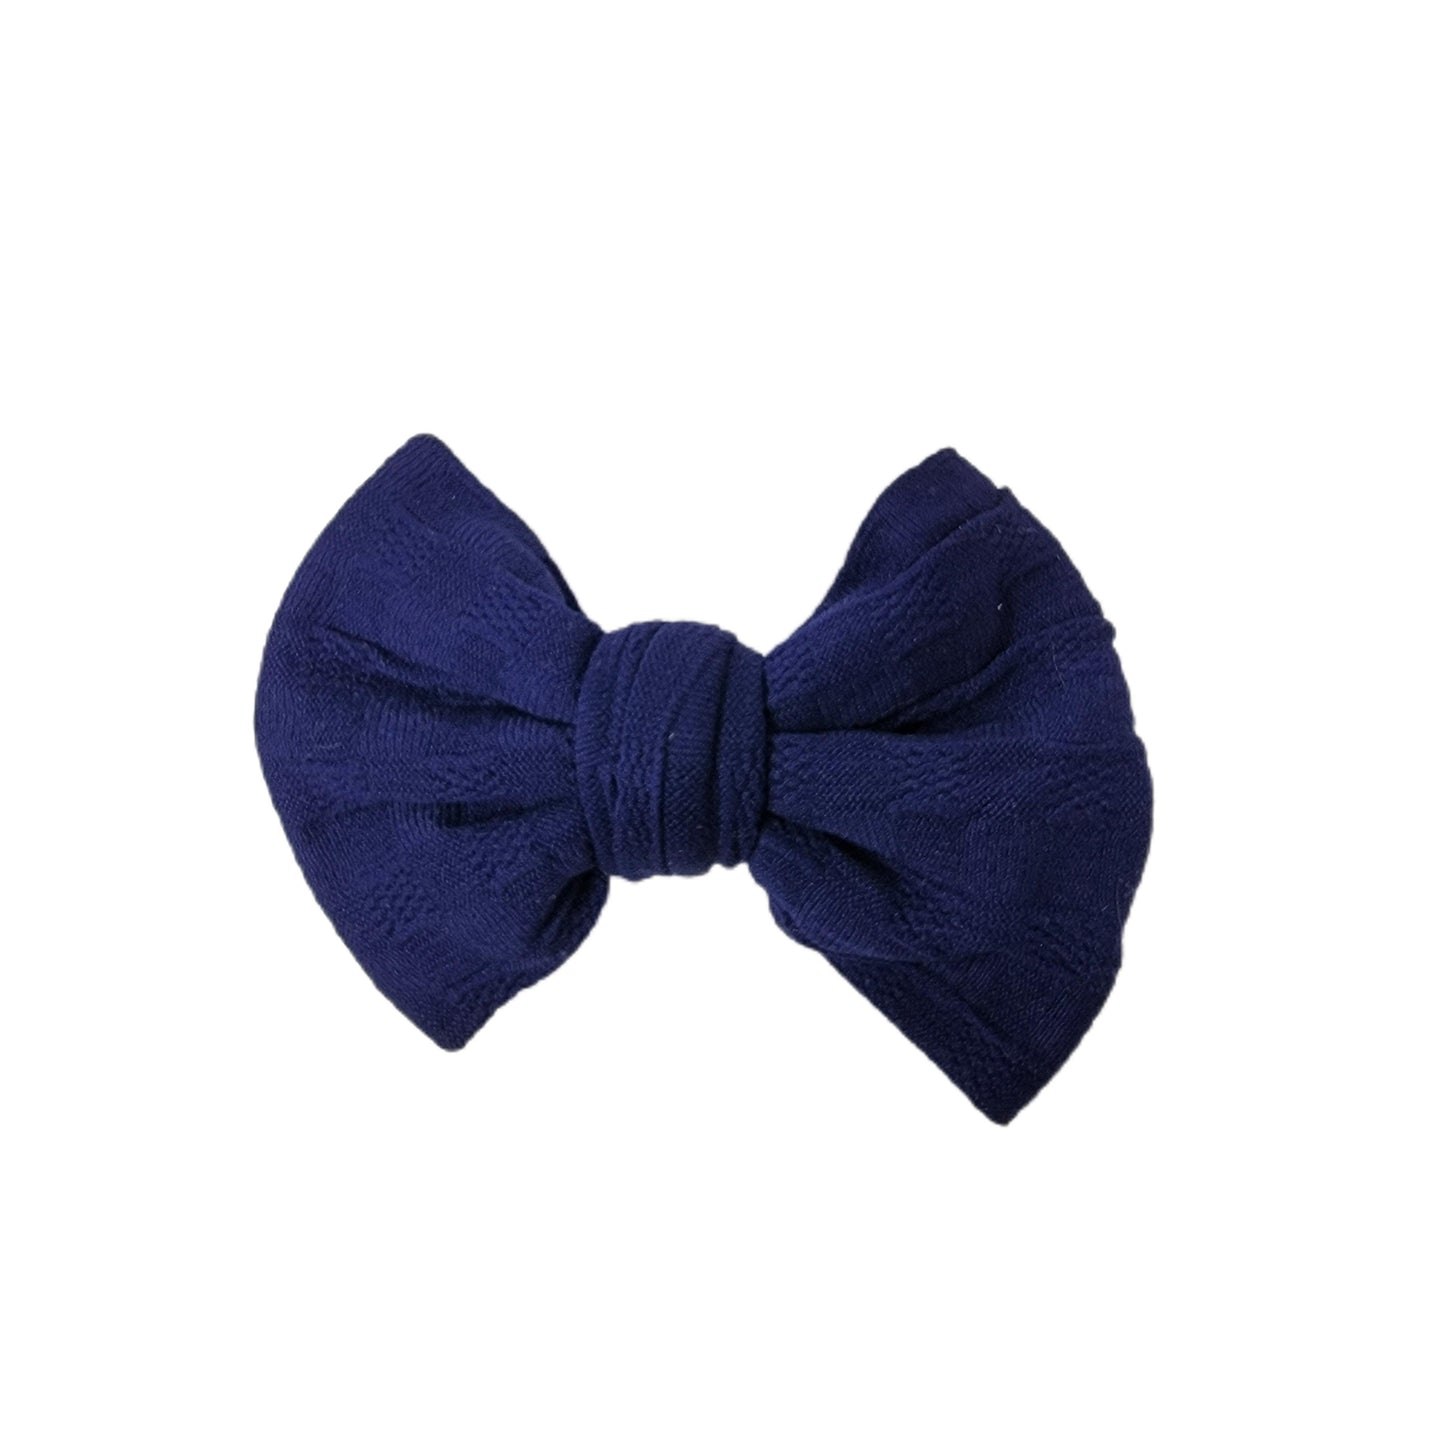 Navy Woven Knit Fabric Bow 4" 